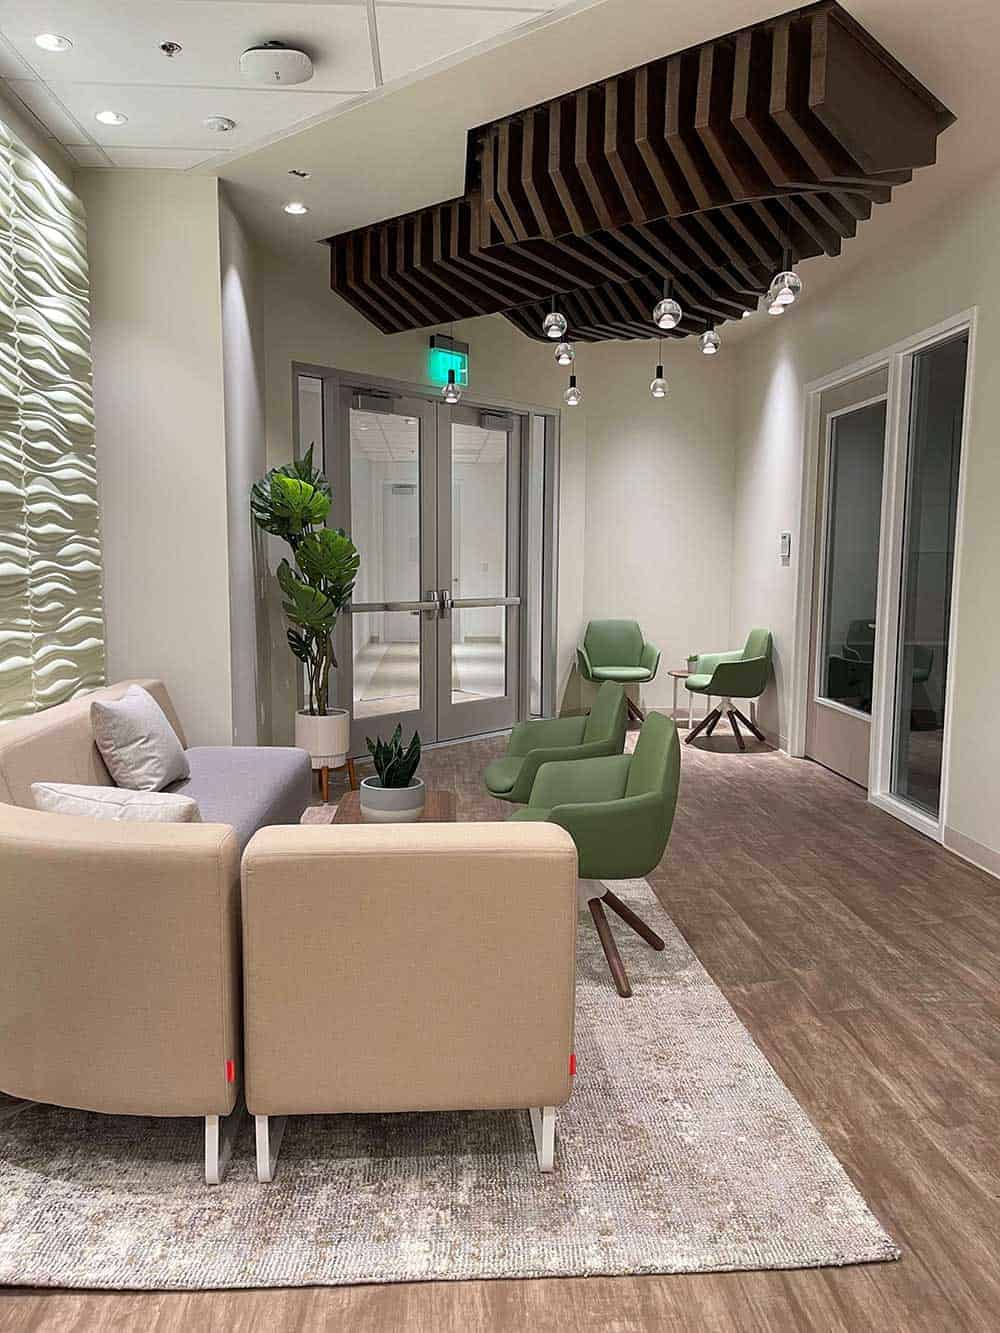 Medical Facility Waiting Area Entrance Design With Sofa and Chairs